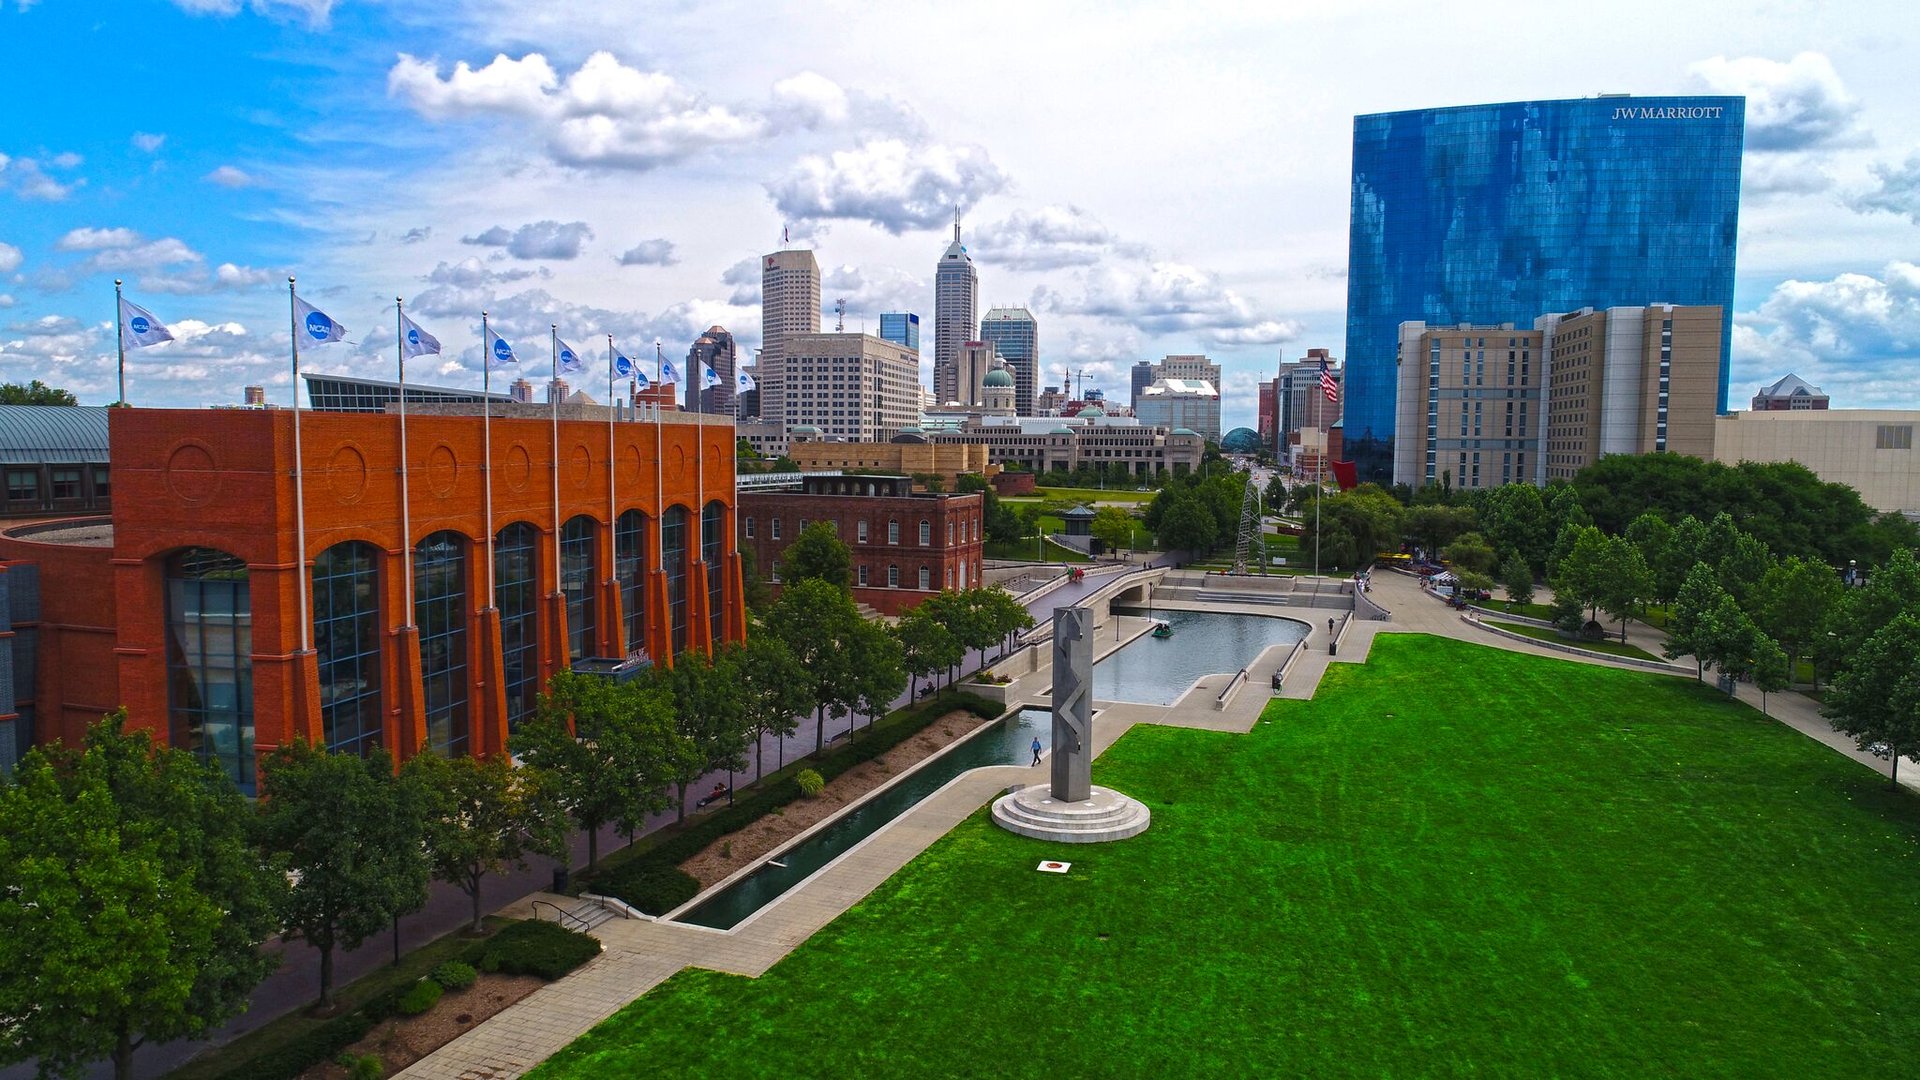 A view of the Canal corridor showing the NCAA headquarters building to the left of the canal and a green space to the right. The city skyline is in the background.